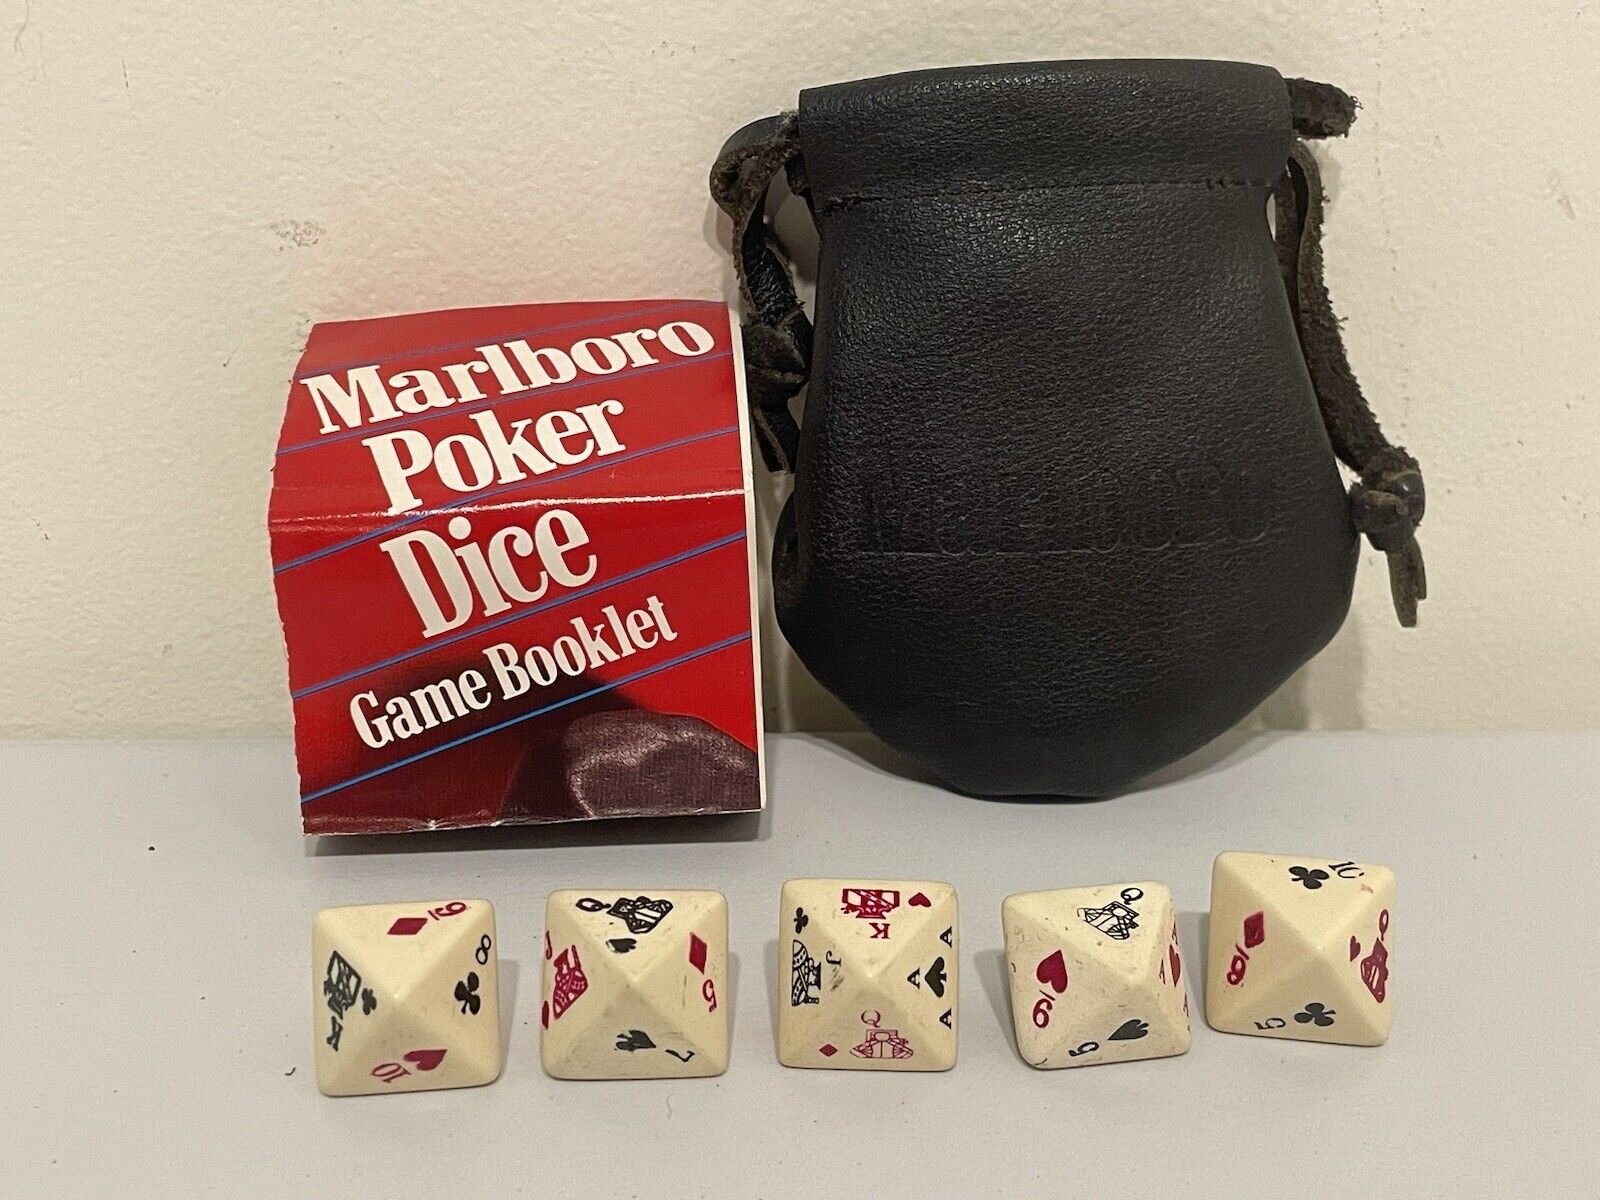  Vintage Marlboro Poker Dice Set With 5 Dice Game Booklet and Blk. Leather Pouch